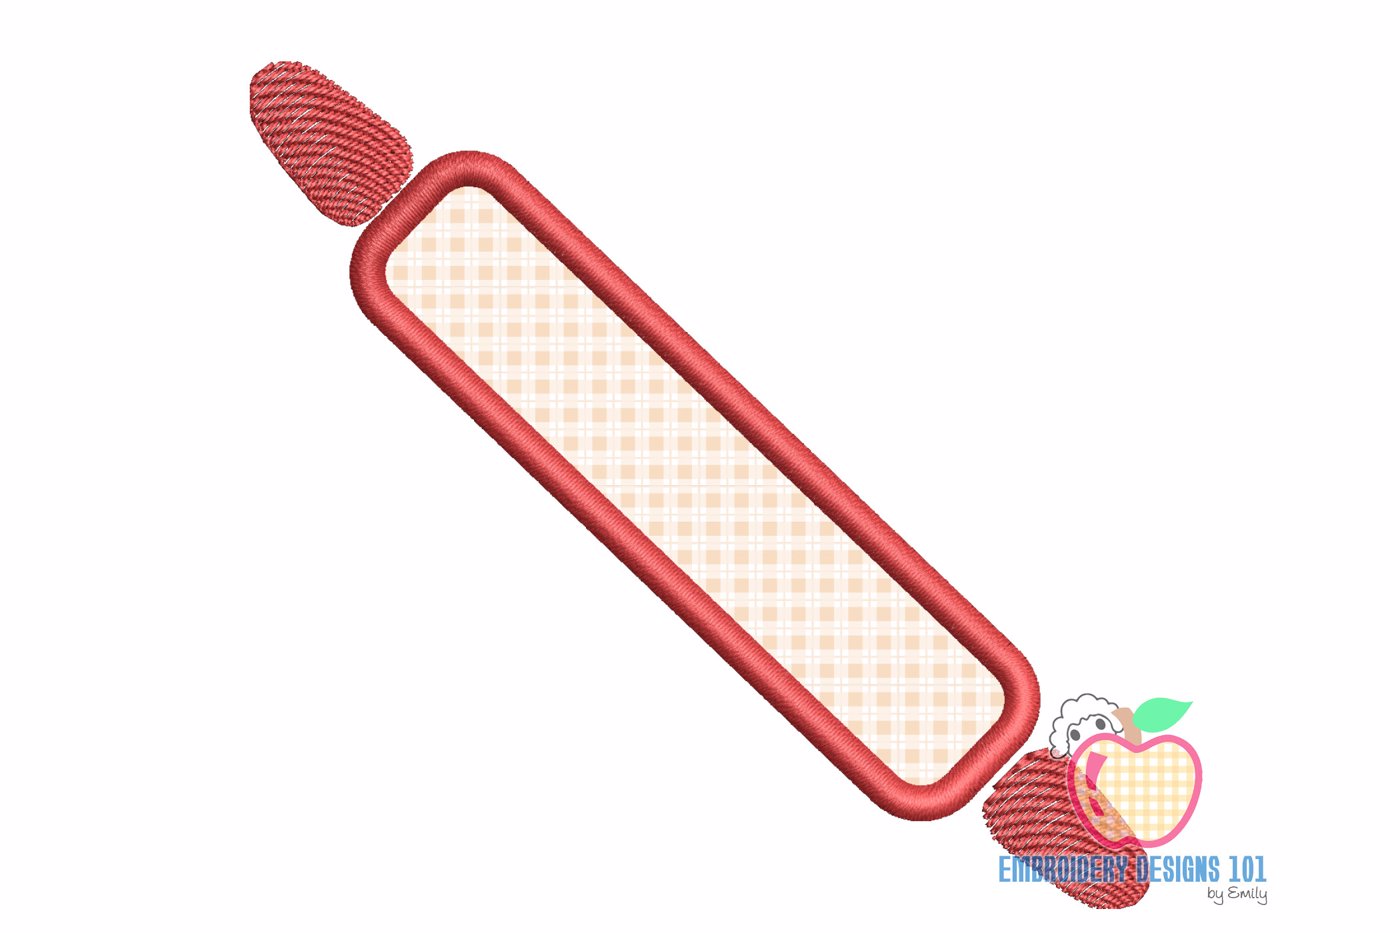 The Colorful Bold Rolling Pin Embroidery Applique